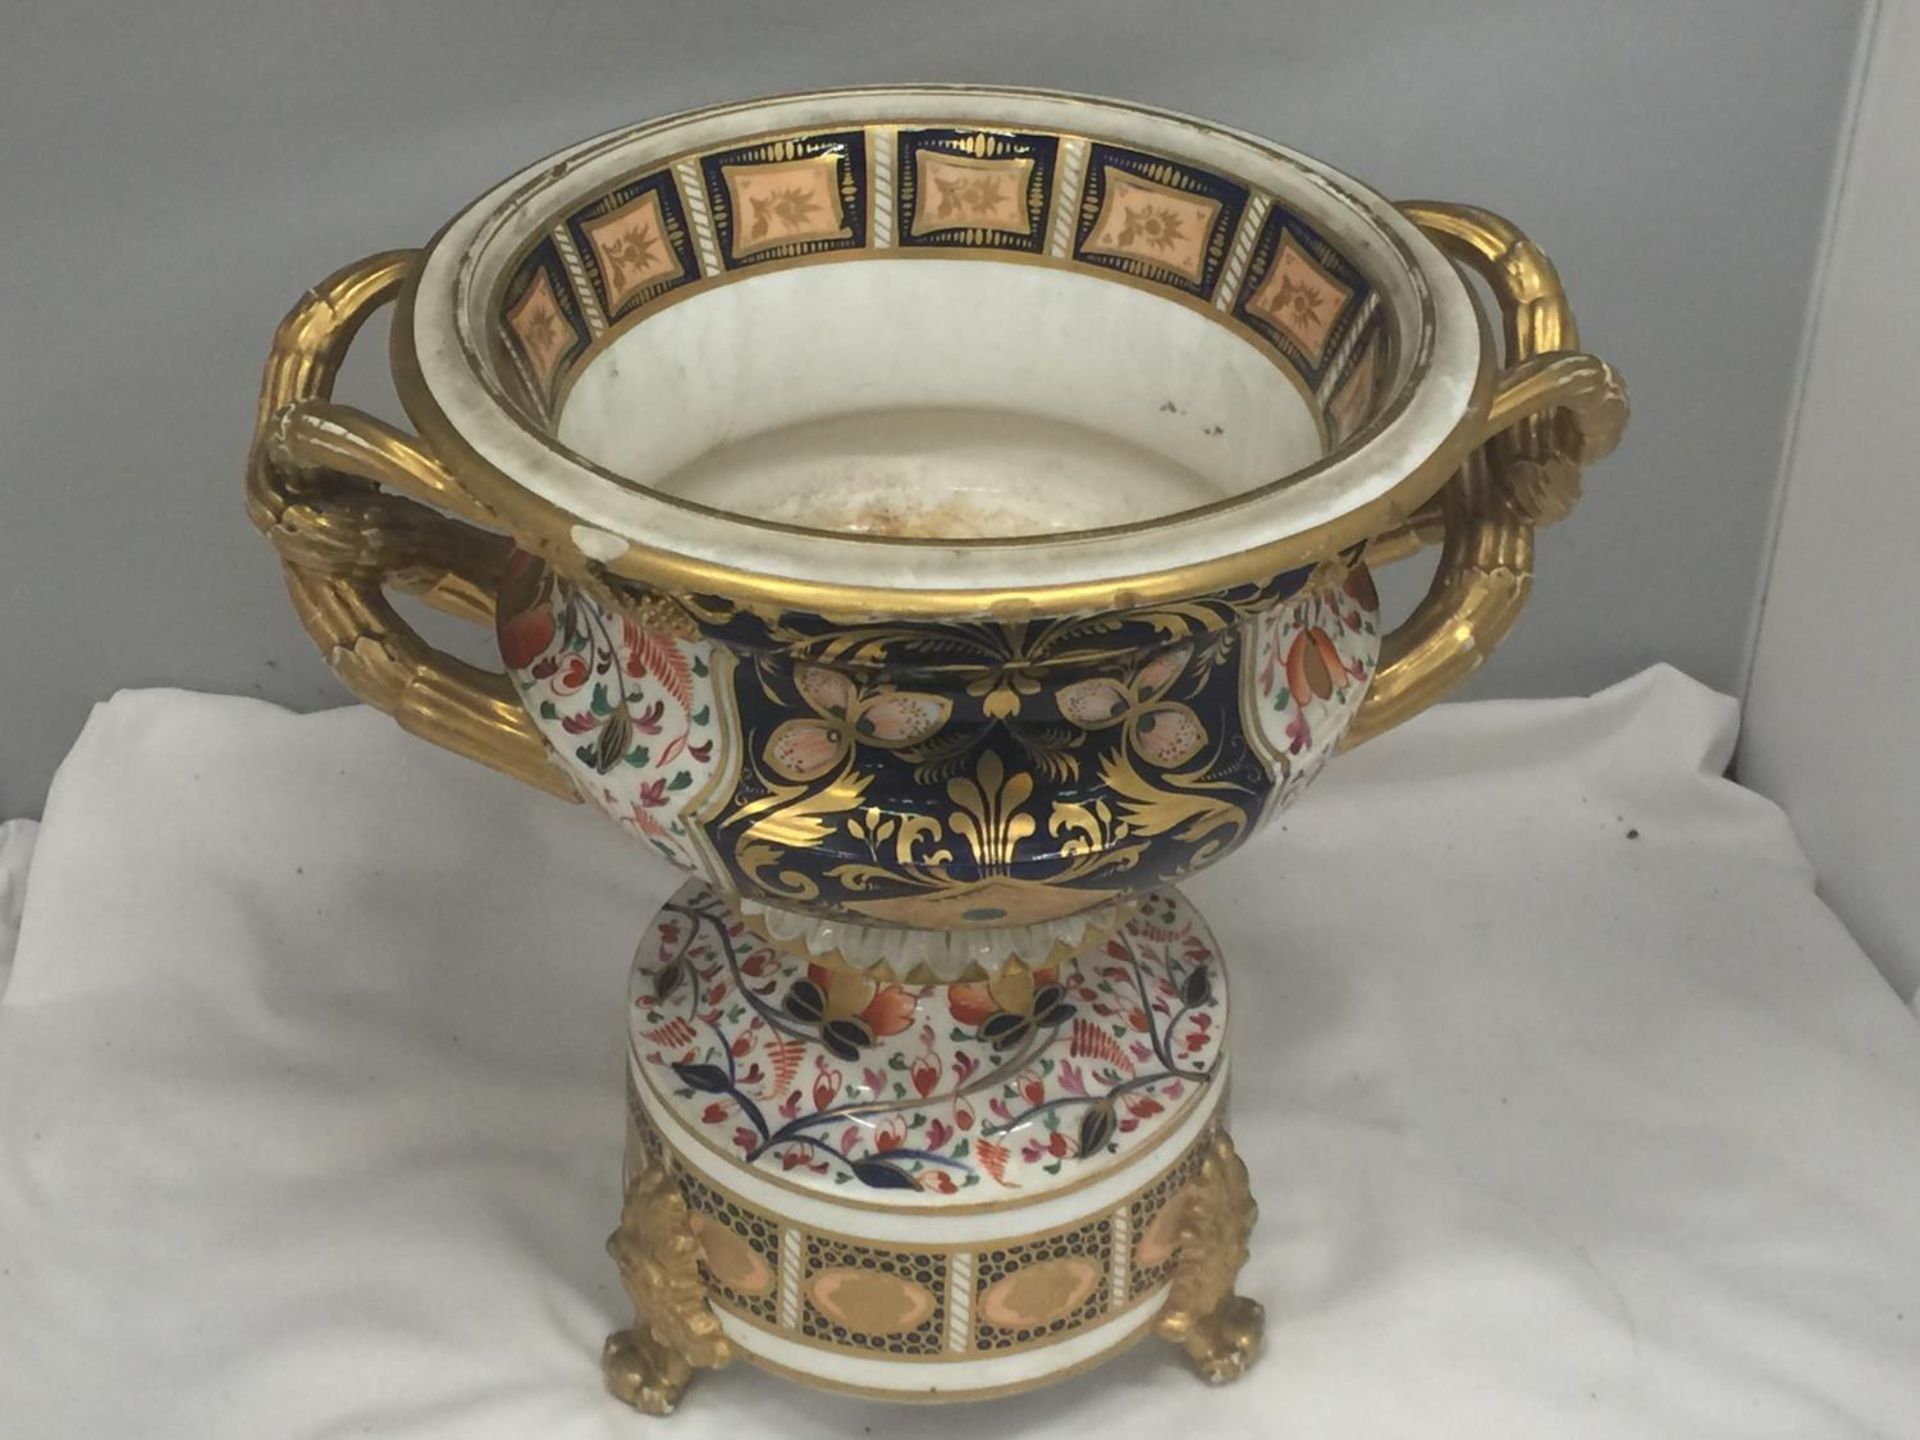 A MID 19TH CENTURY PORCELAIN CAMPANA SHAPED URN ON STAND WITH ELABORATE GILT DECORATION, HEIGHT 32CM